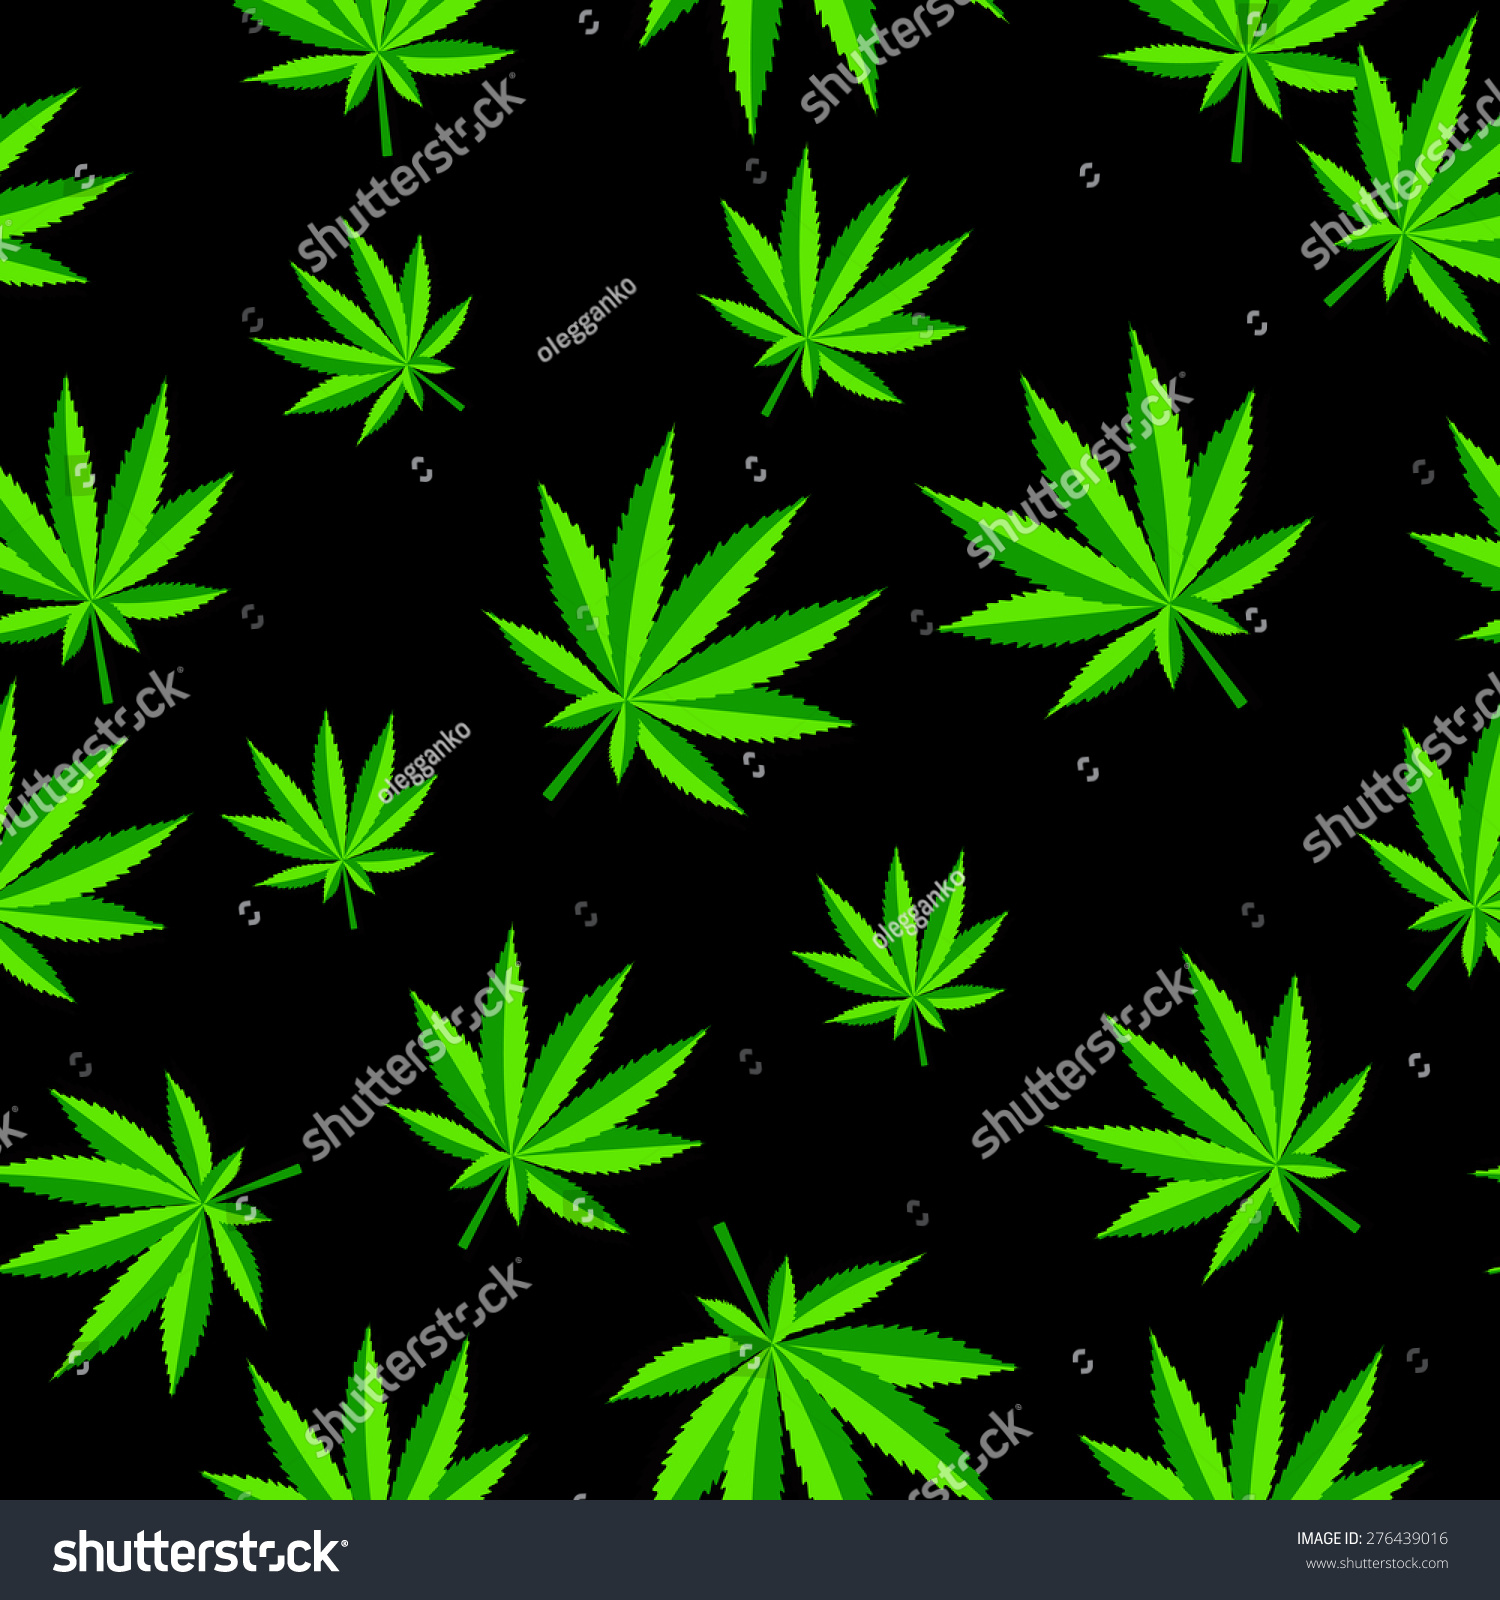 Abstract Cannabis Seamless Pattern Background Vector Illustration Eps10 ...